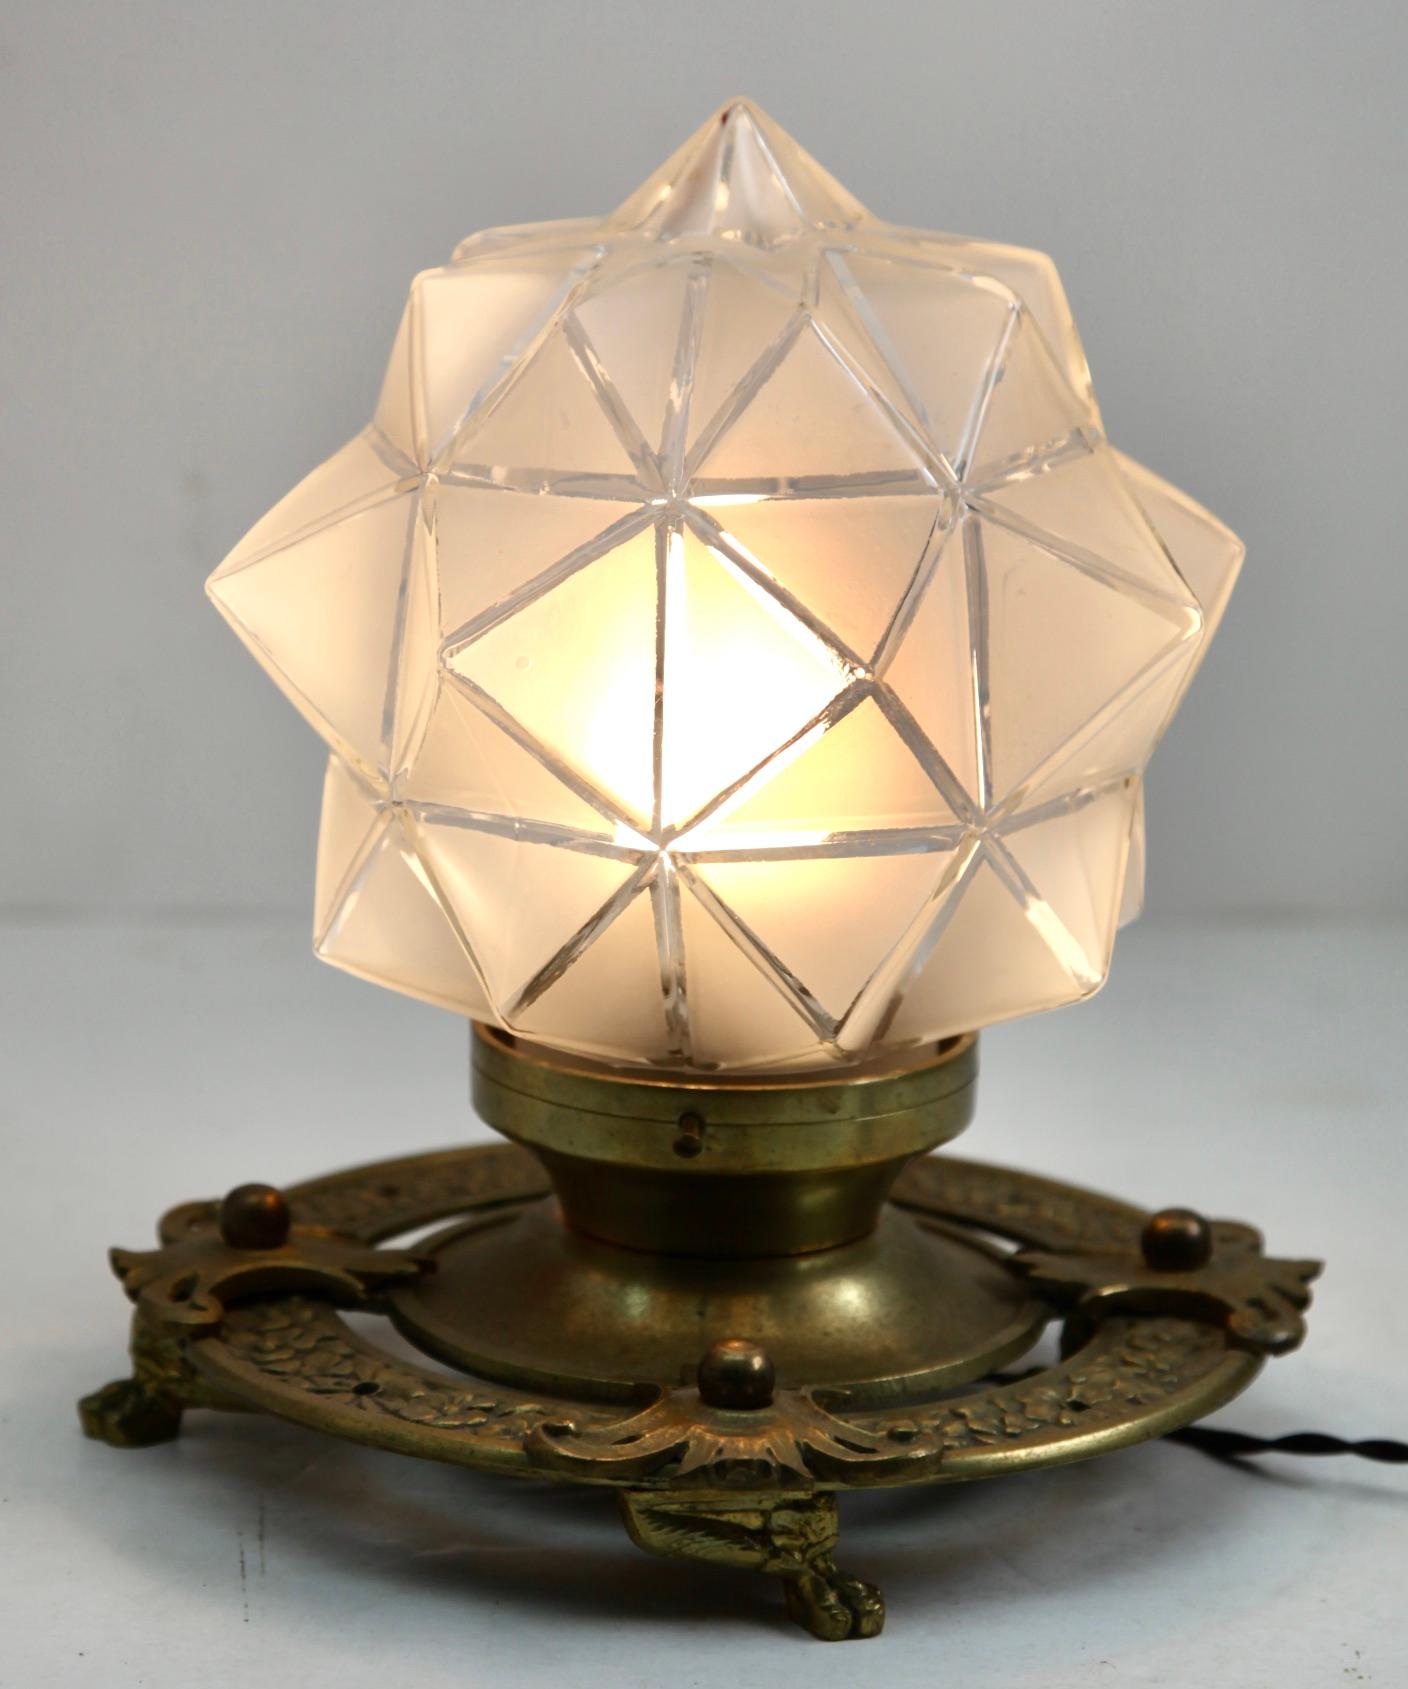 Art Nouveau lamp flush mount France, 1900s
Photography fails to capture the simple elegant illumination provided by this lamp.

In Good condition and in full working order 

And safe for immediate usage in the World.

    
   
    

  